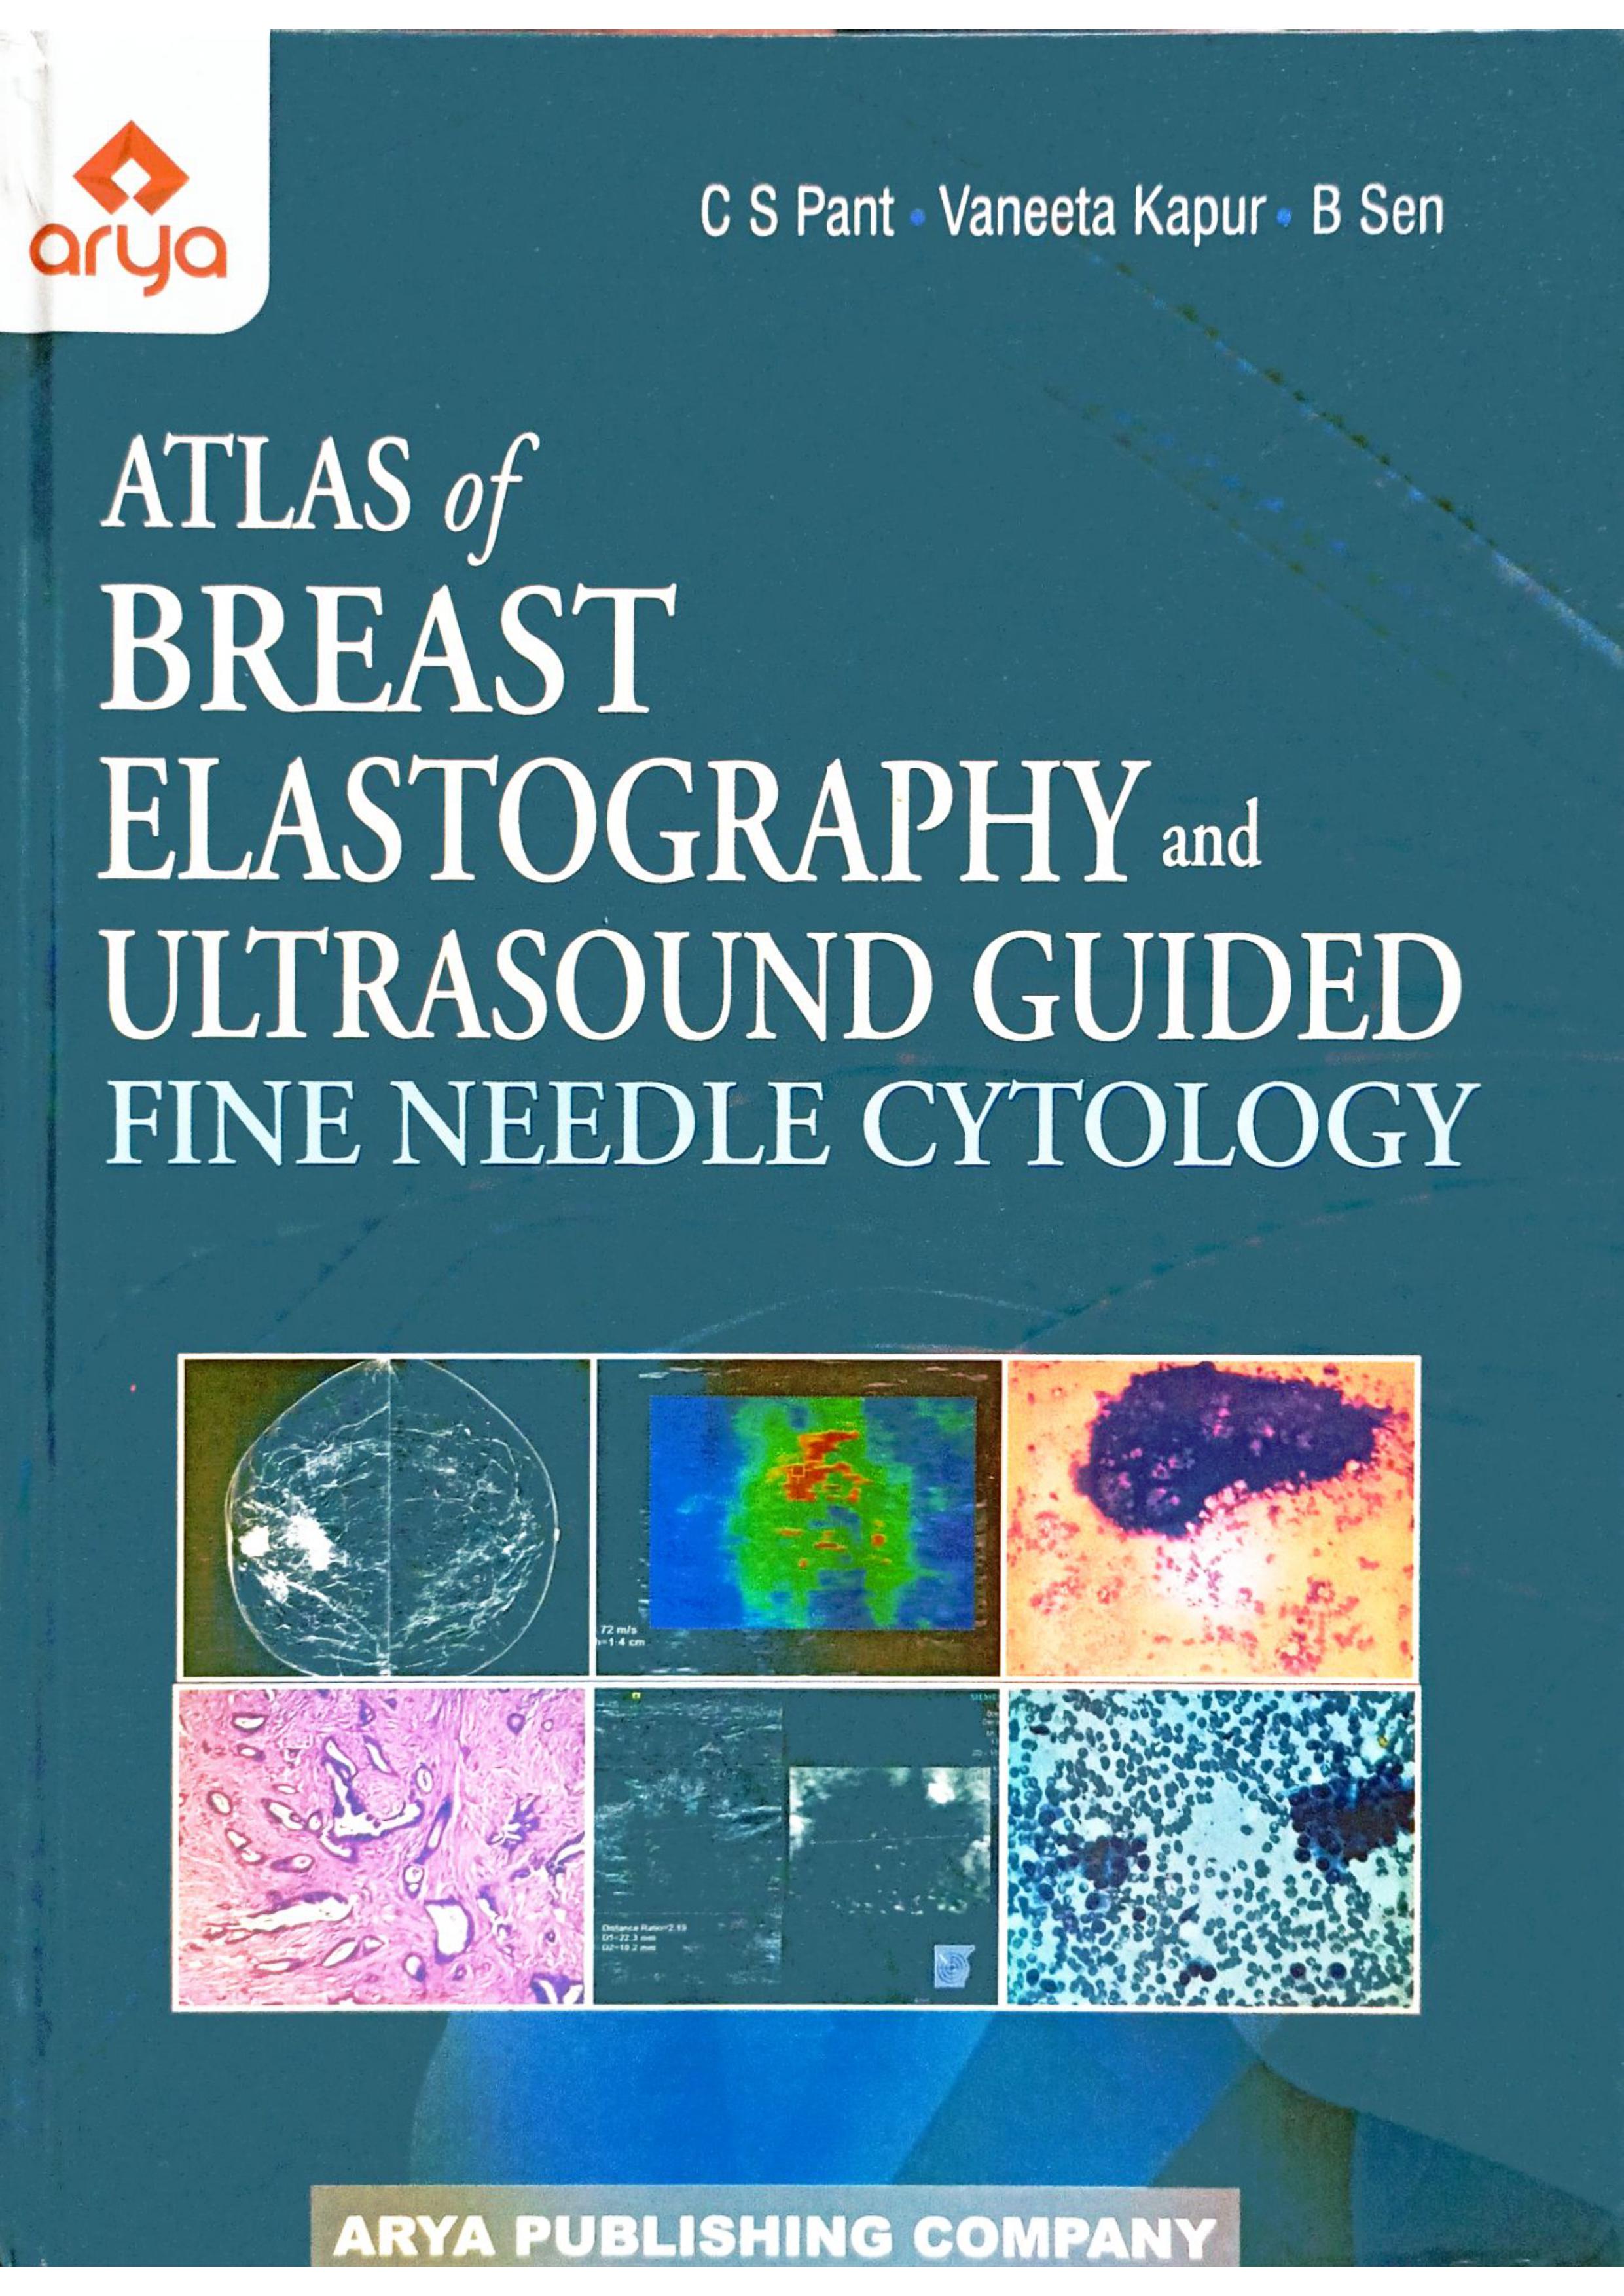 Atlas of Breast Elastography and Ultrasound Guided fine Needle Cytology